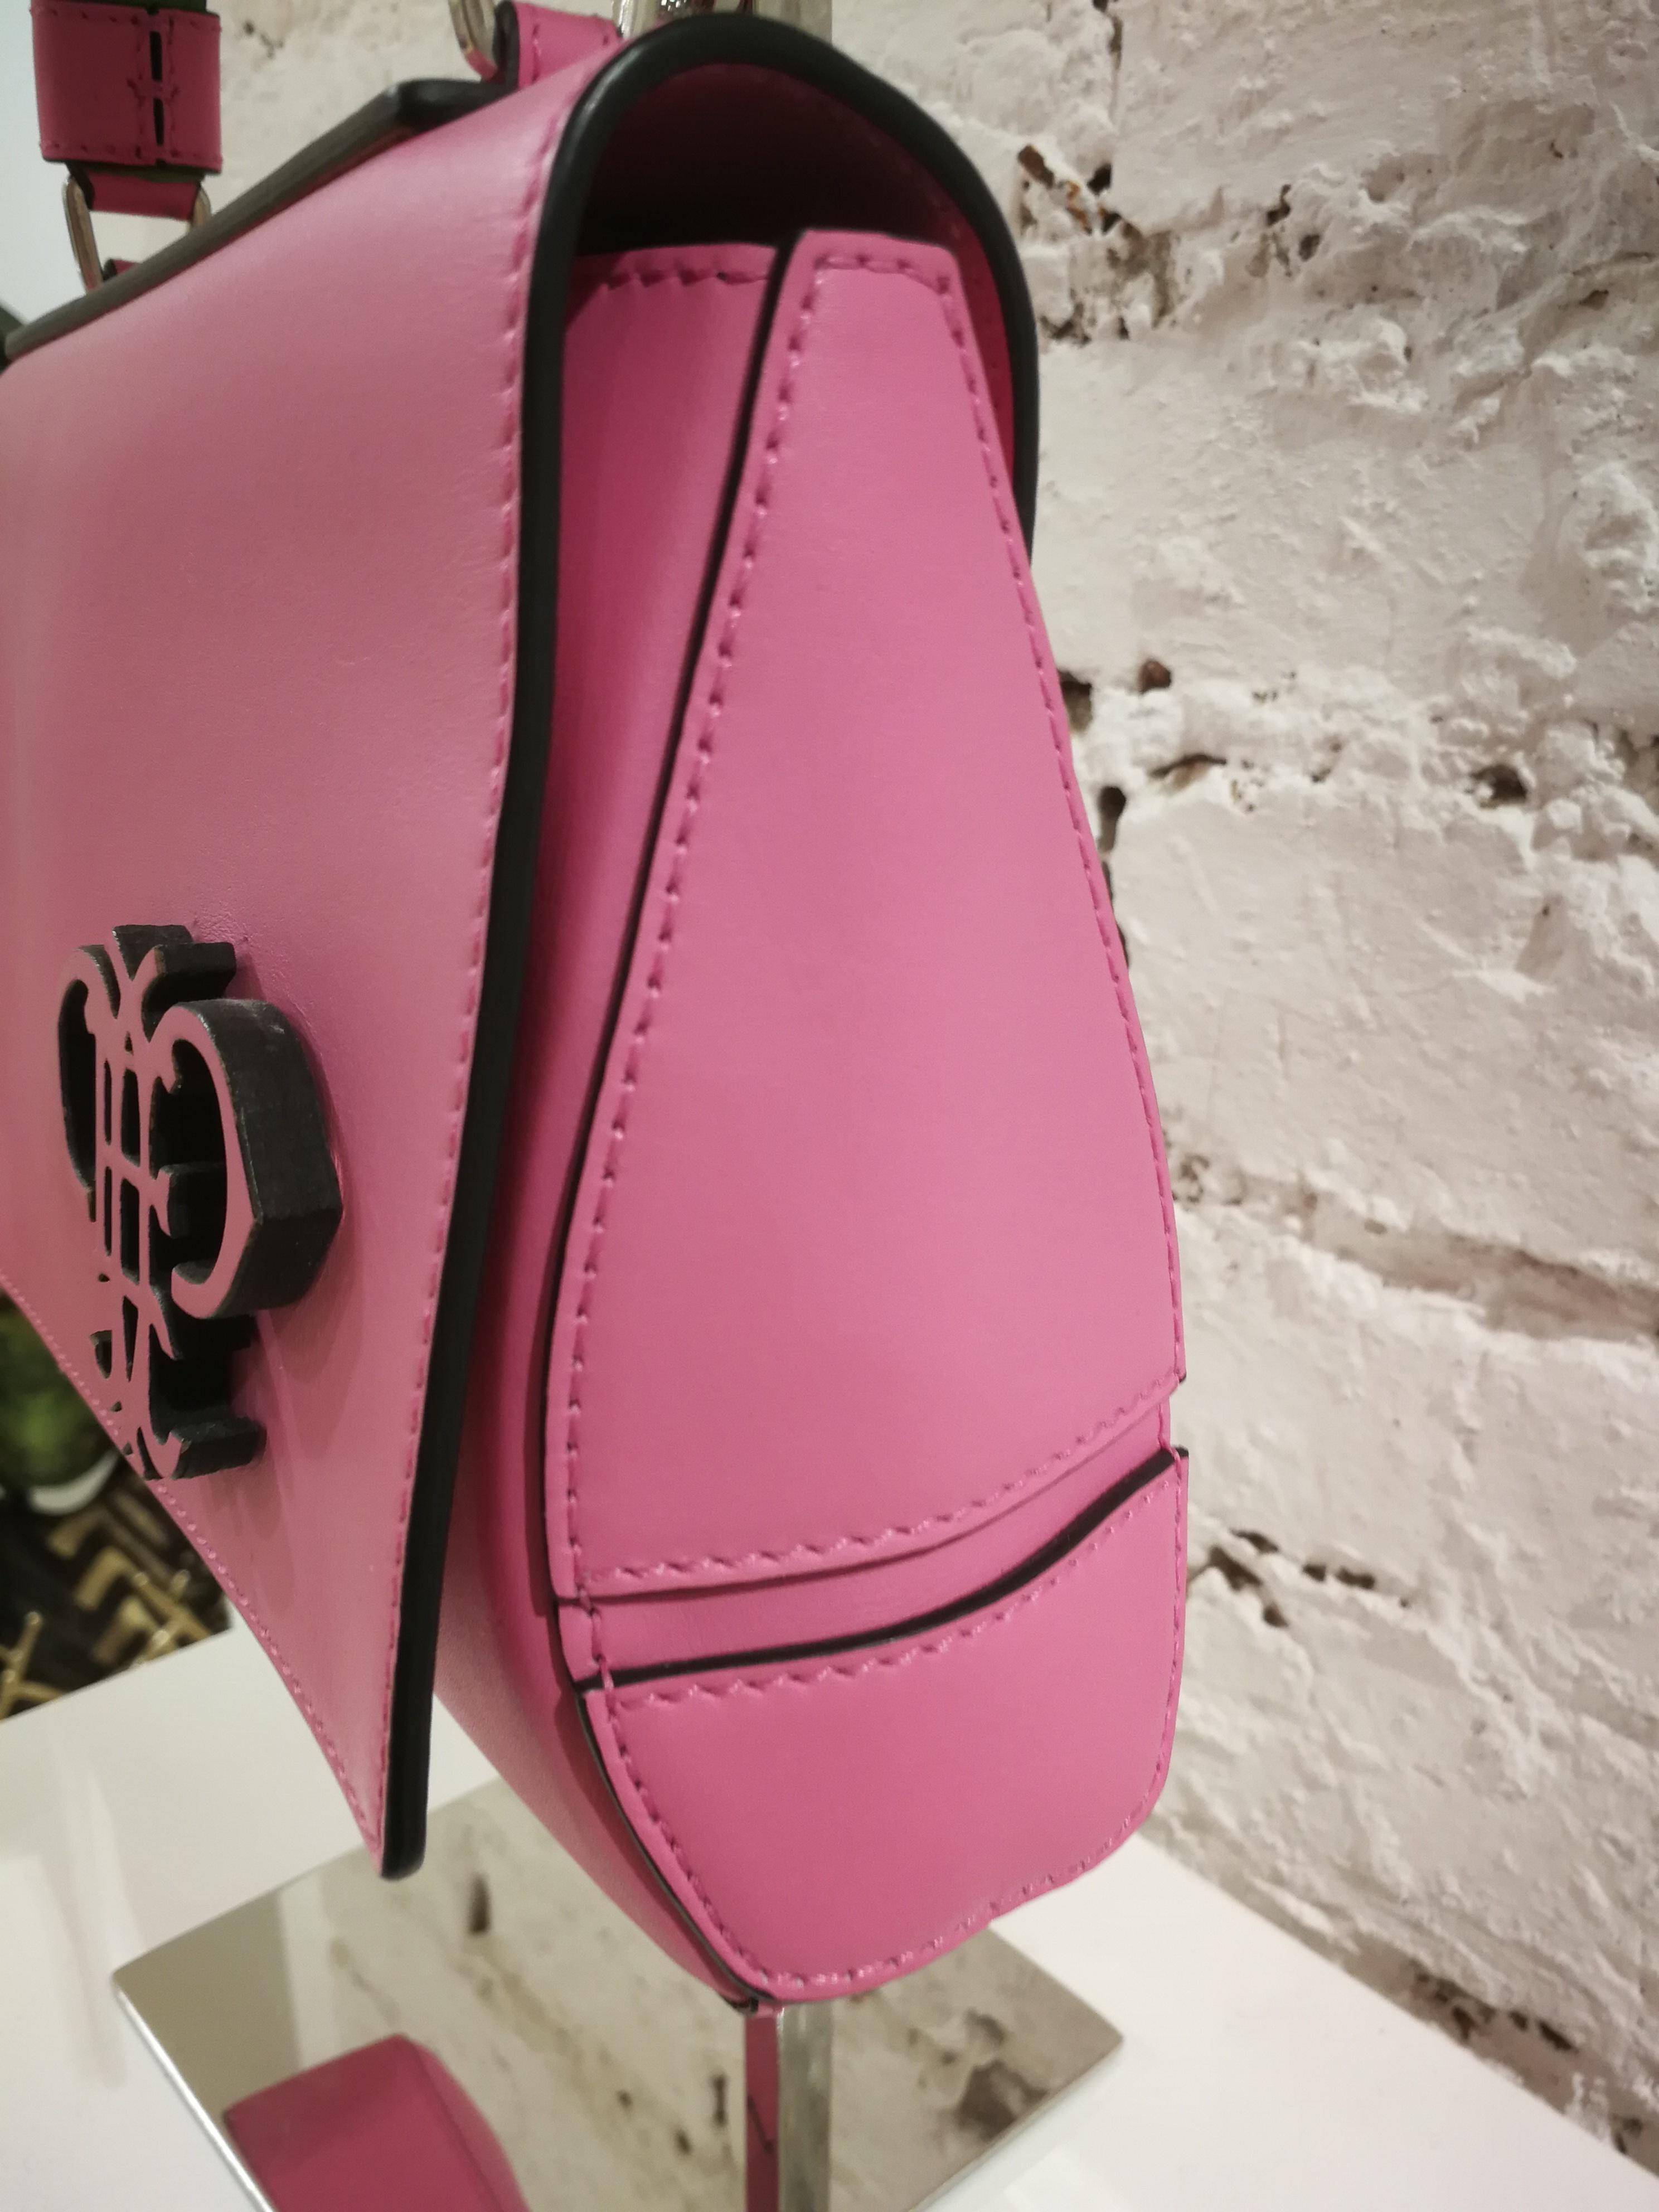 Emilio Pucci Pink Leather Shoulder Bag

Totally made in italy

Measurements: 24 x 15 cm